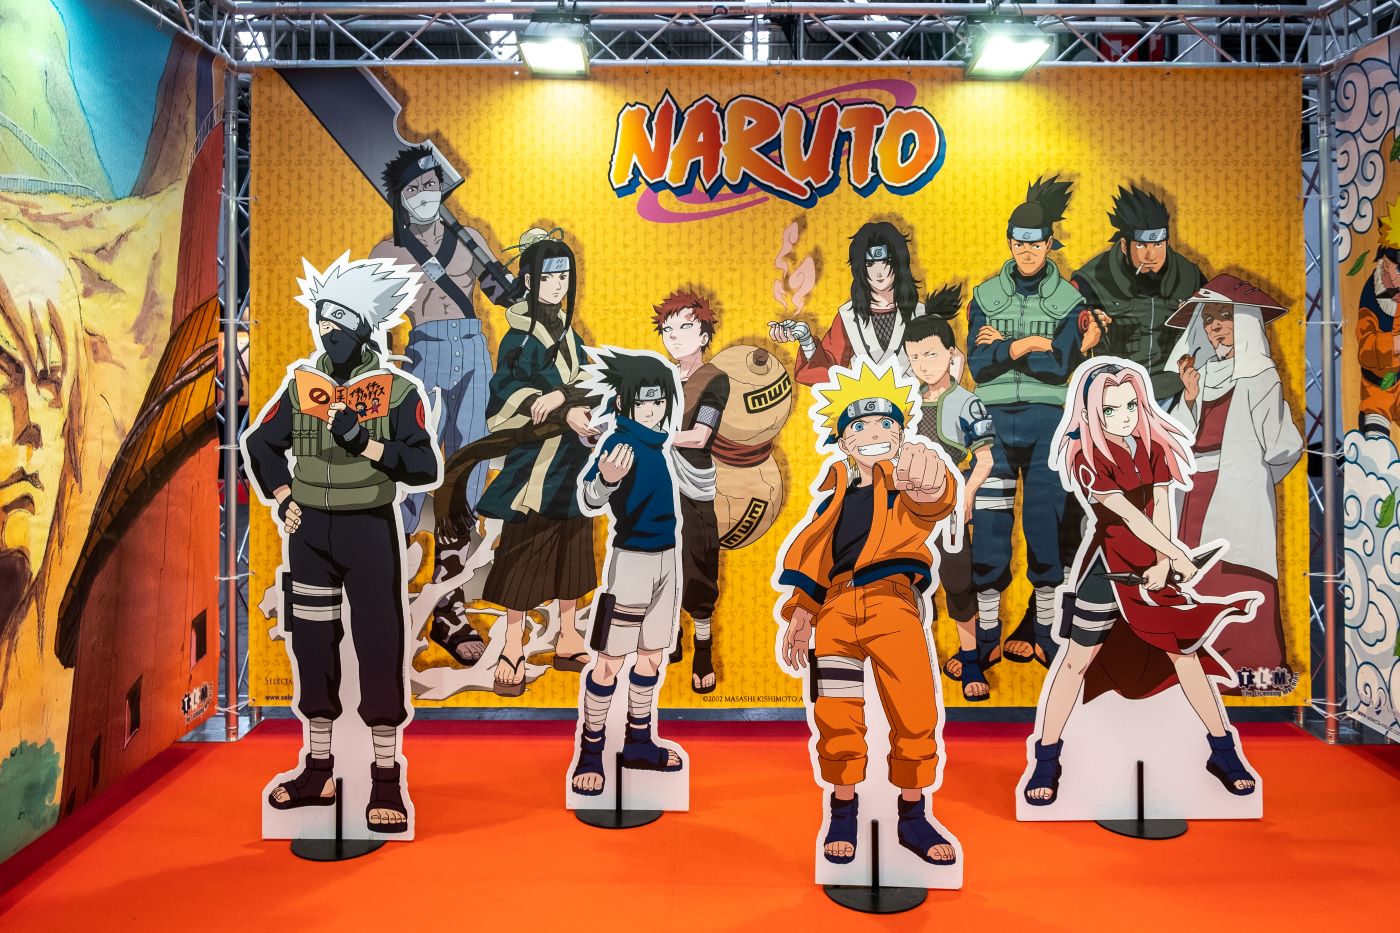 'Naruto' character cardboard cutouts in front of a background of more 'Naruto' characters.